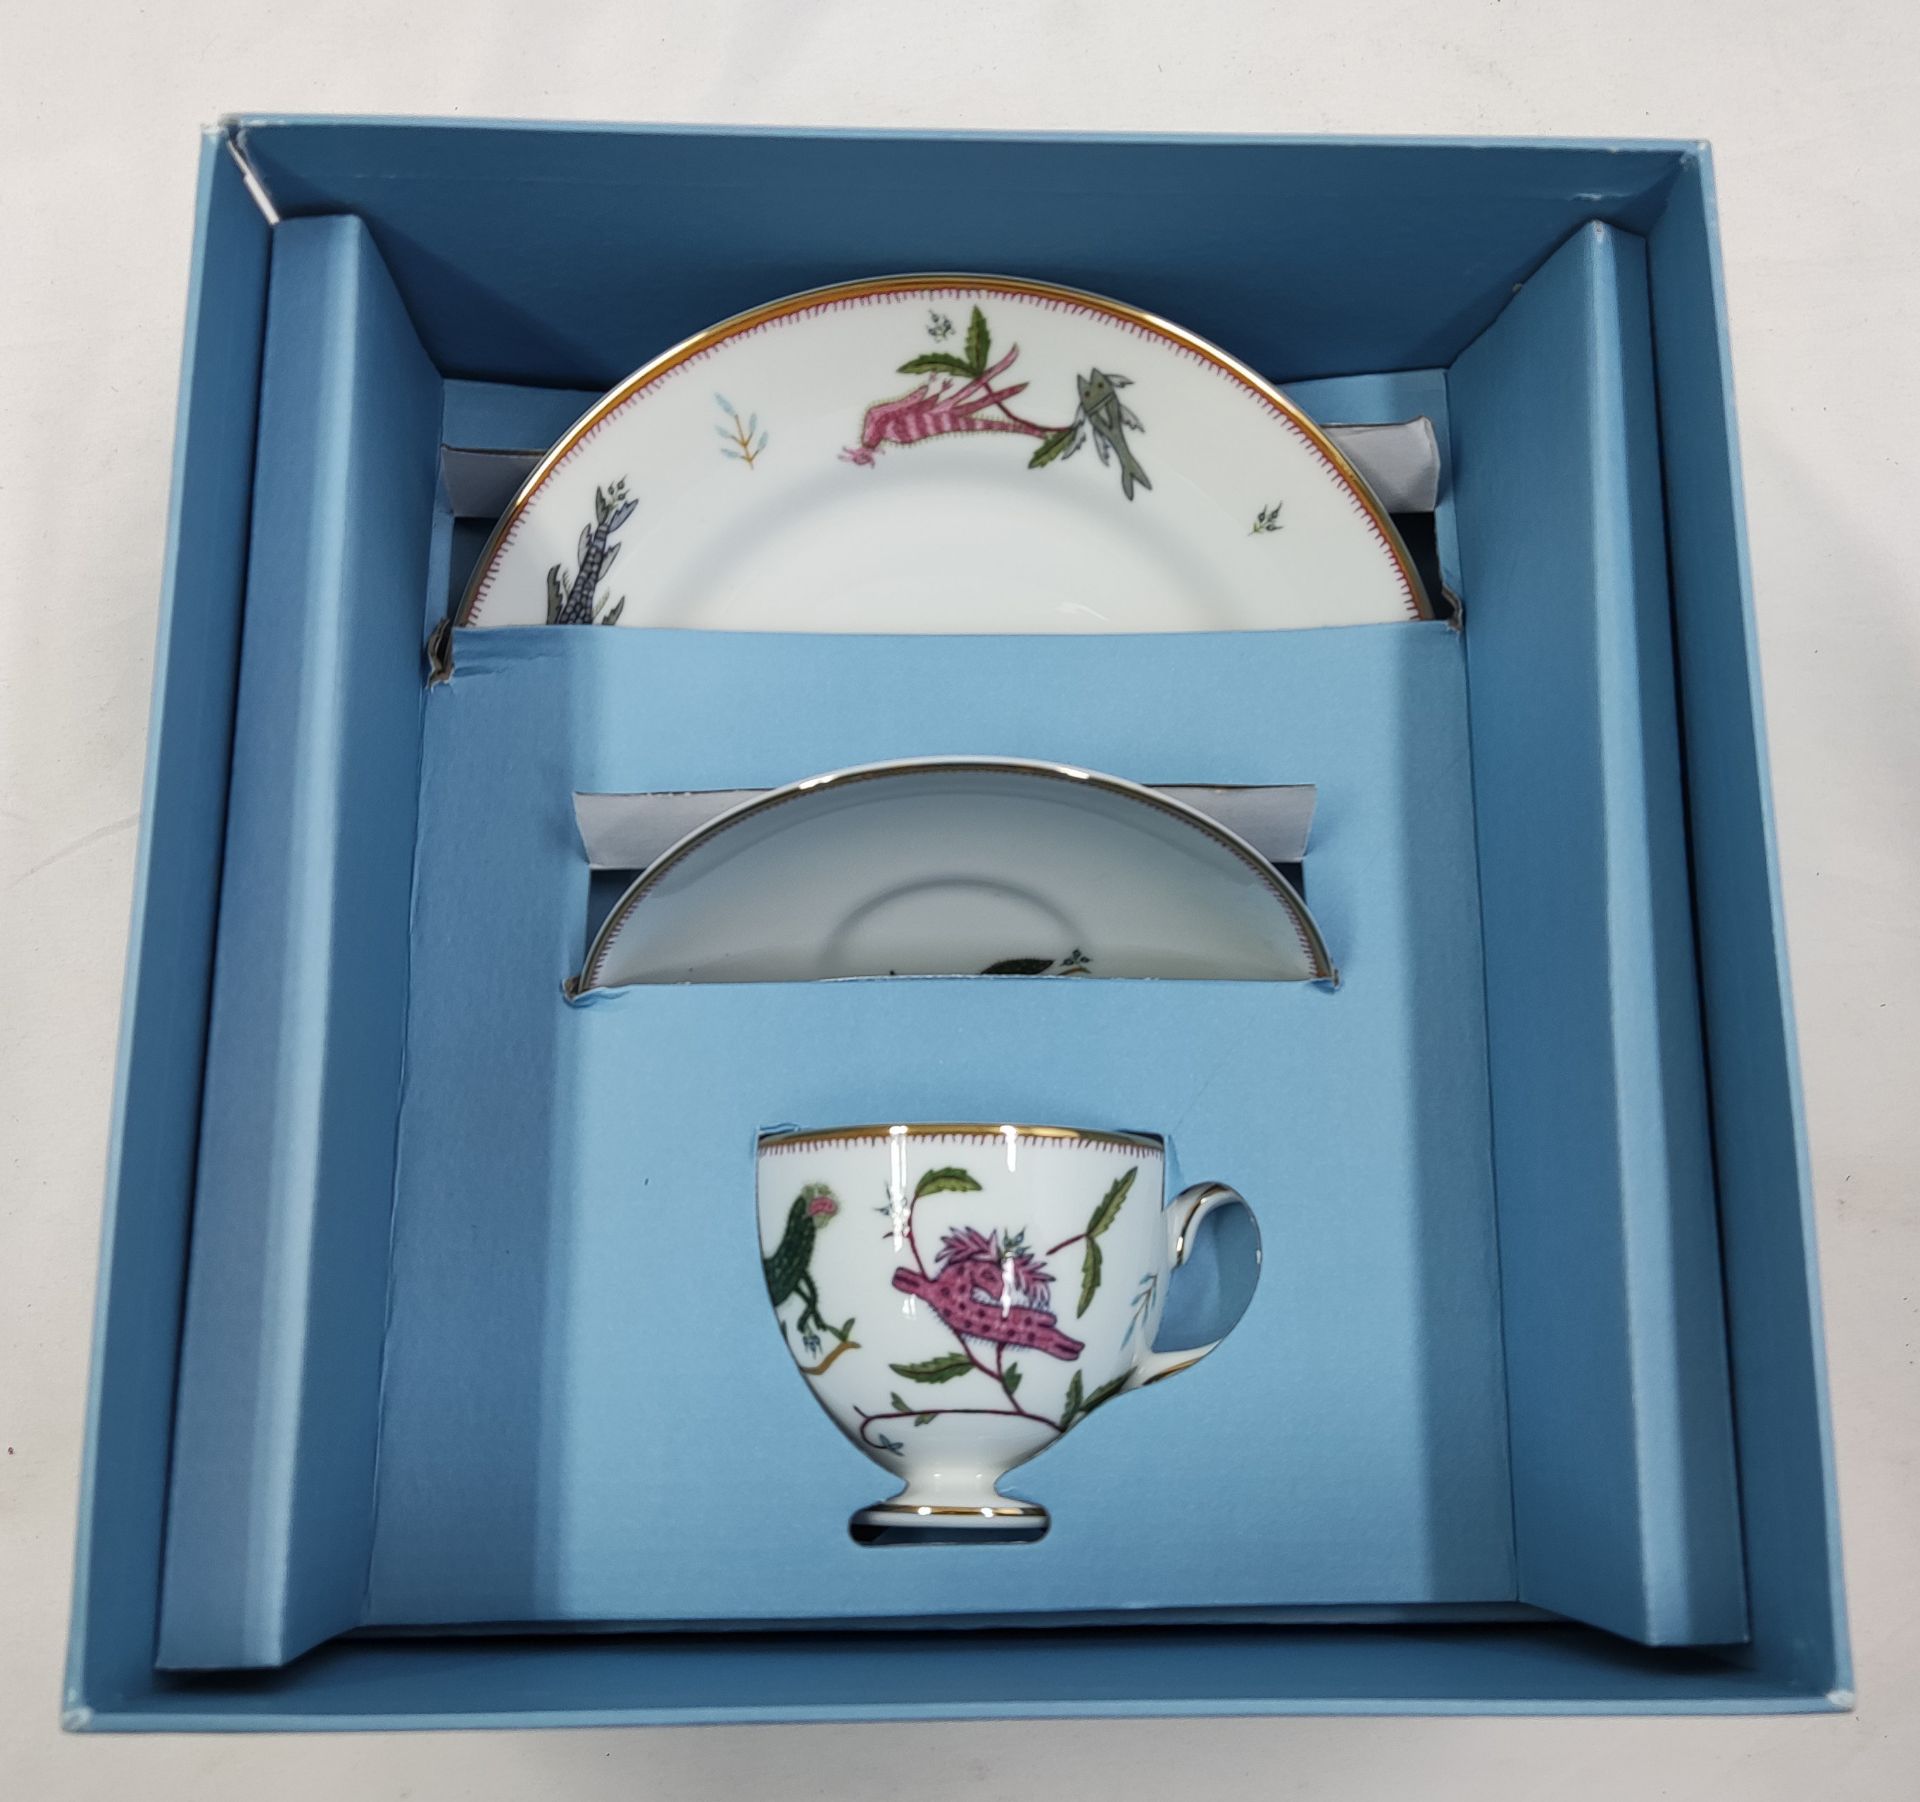 1 x WEDGWOOD Mythical Creatures Fine Bone China Teacup/Saucer/Plate Set - New/Boxed - RRP £140.00 - Image 16 of 20